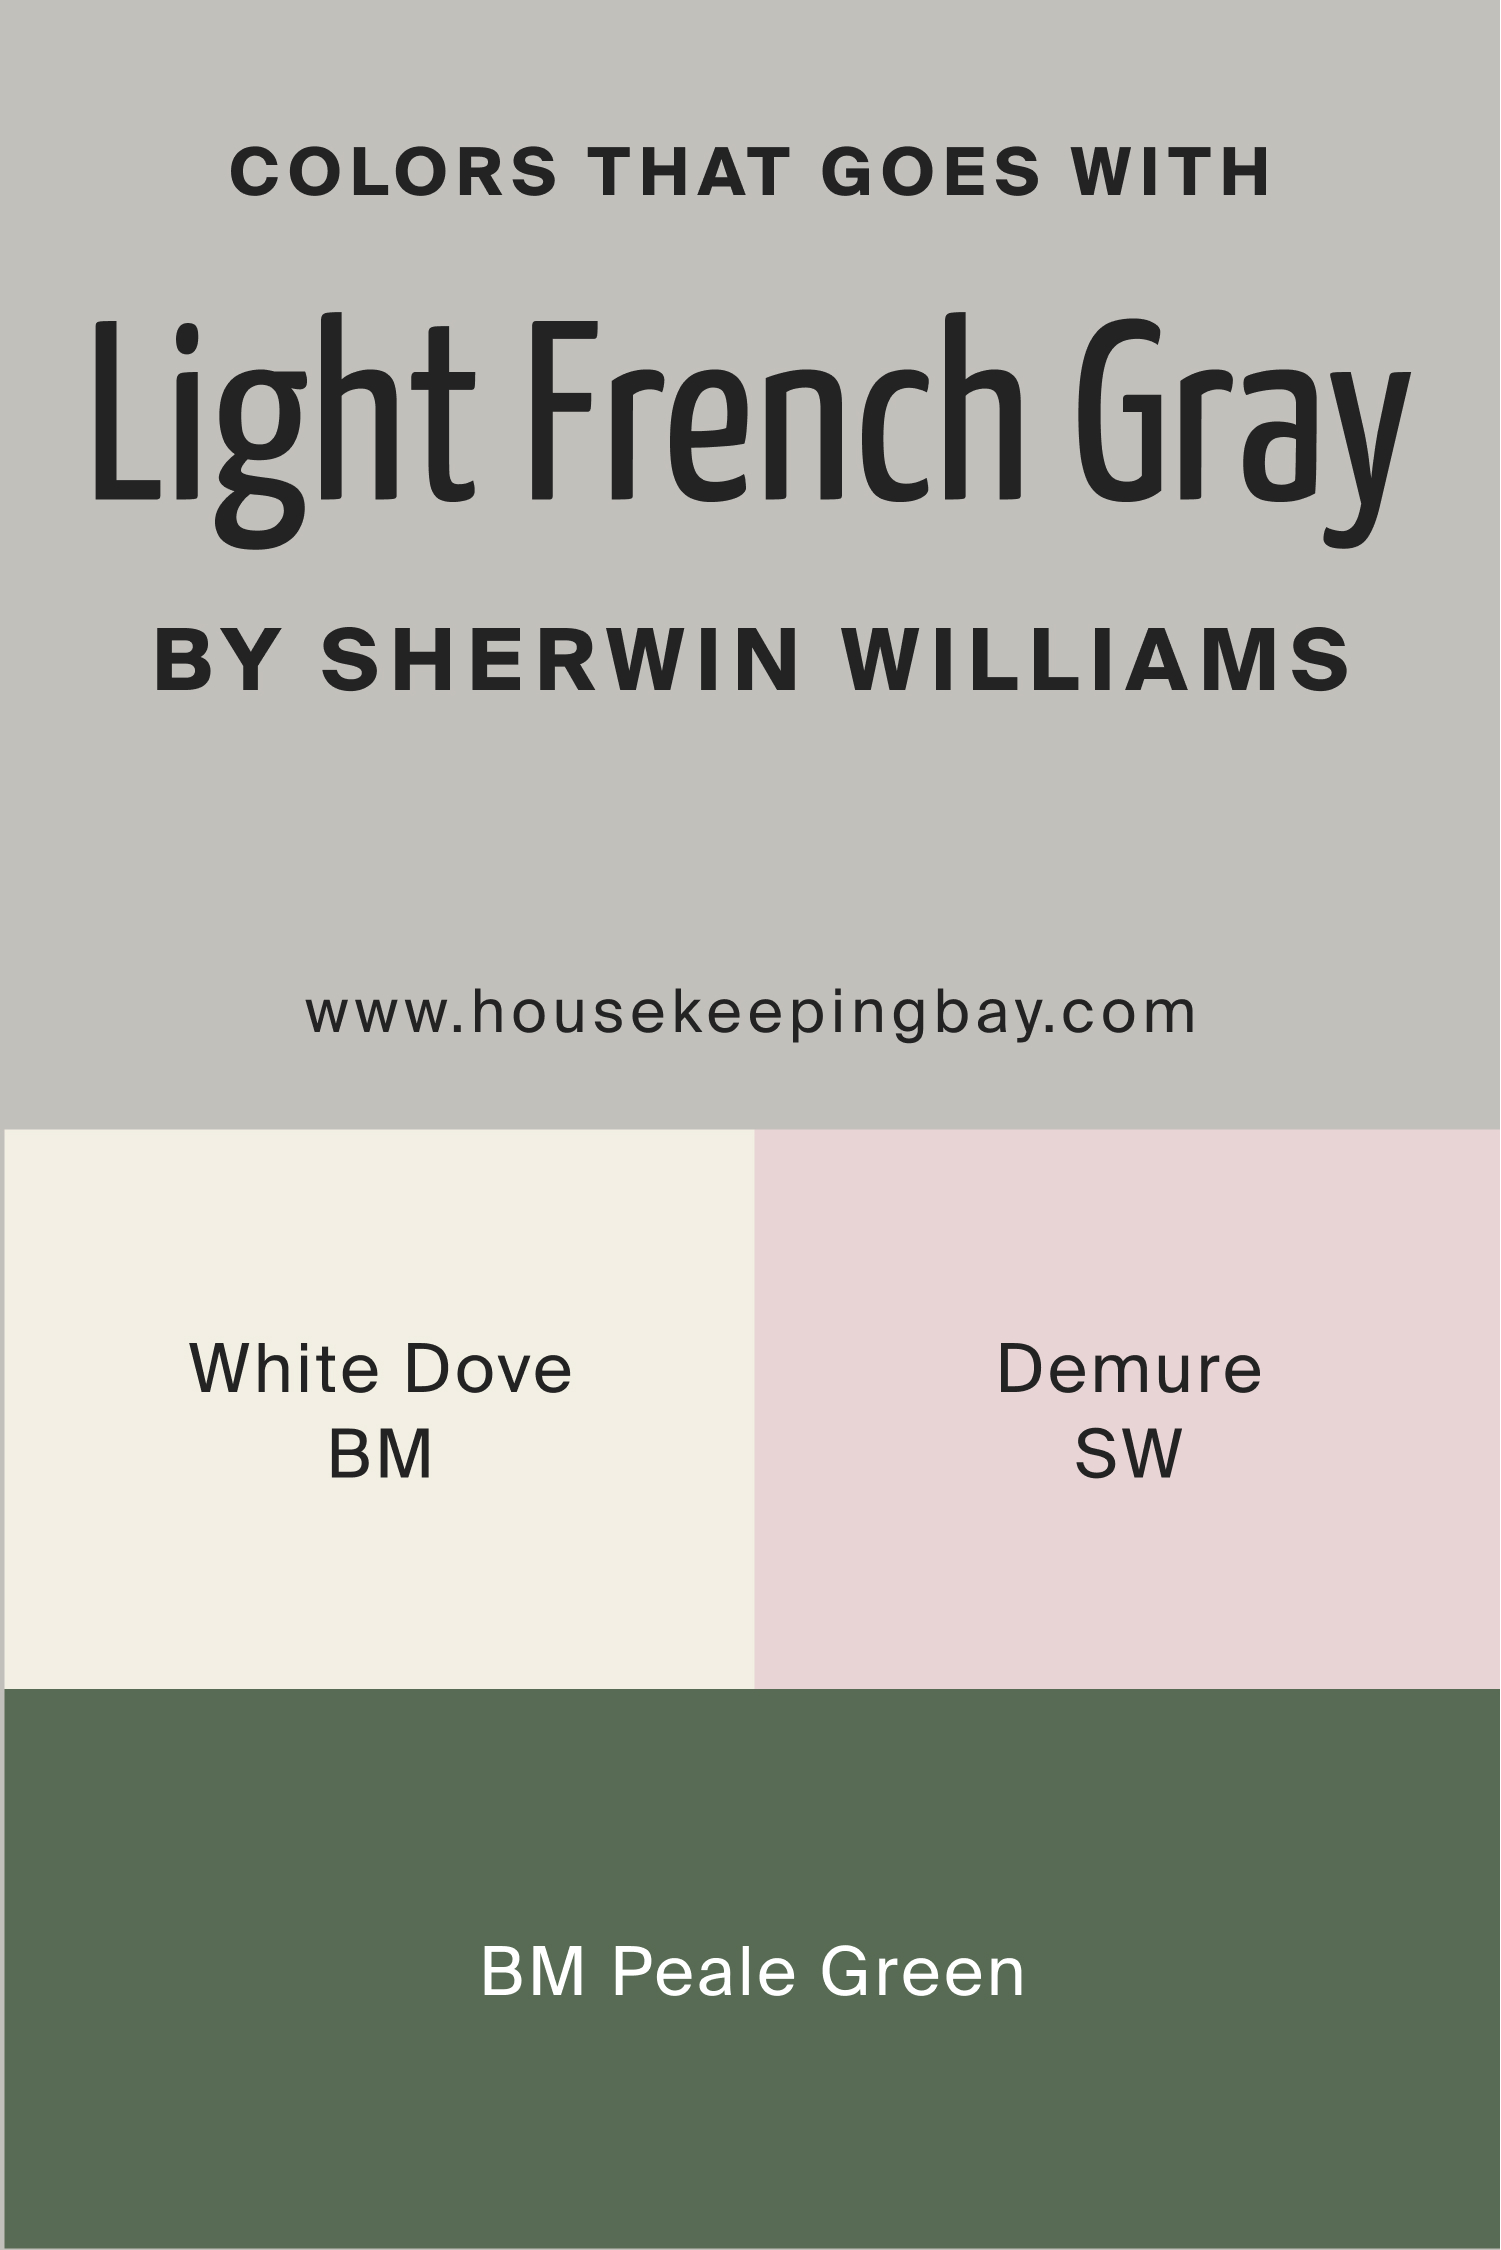 Colors that goes with Light French Gray by Sherwin Williams